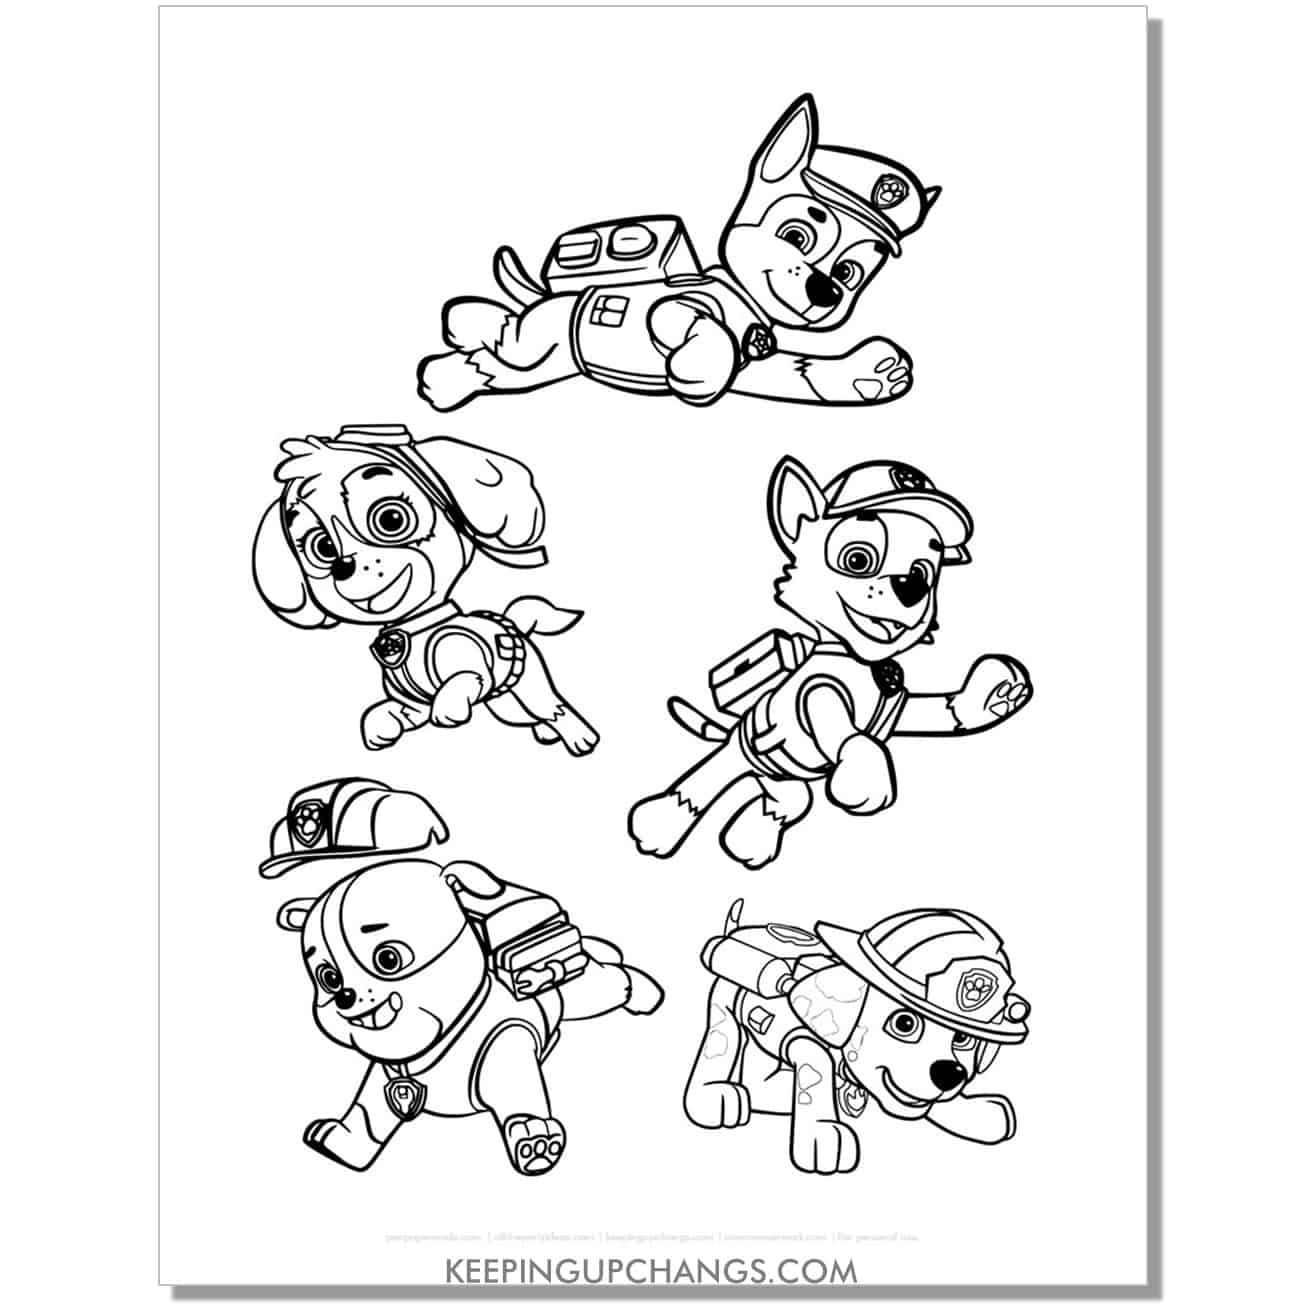 free chase, skye, rocky, rubble, and marshall paw patrol coloring page, sheet.